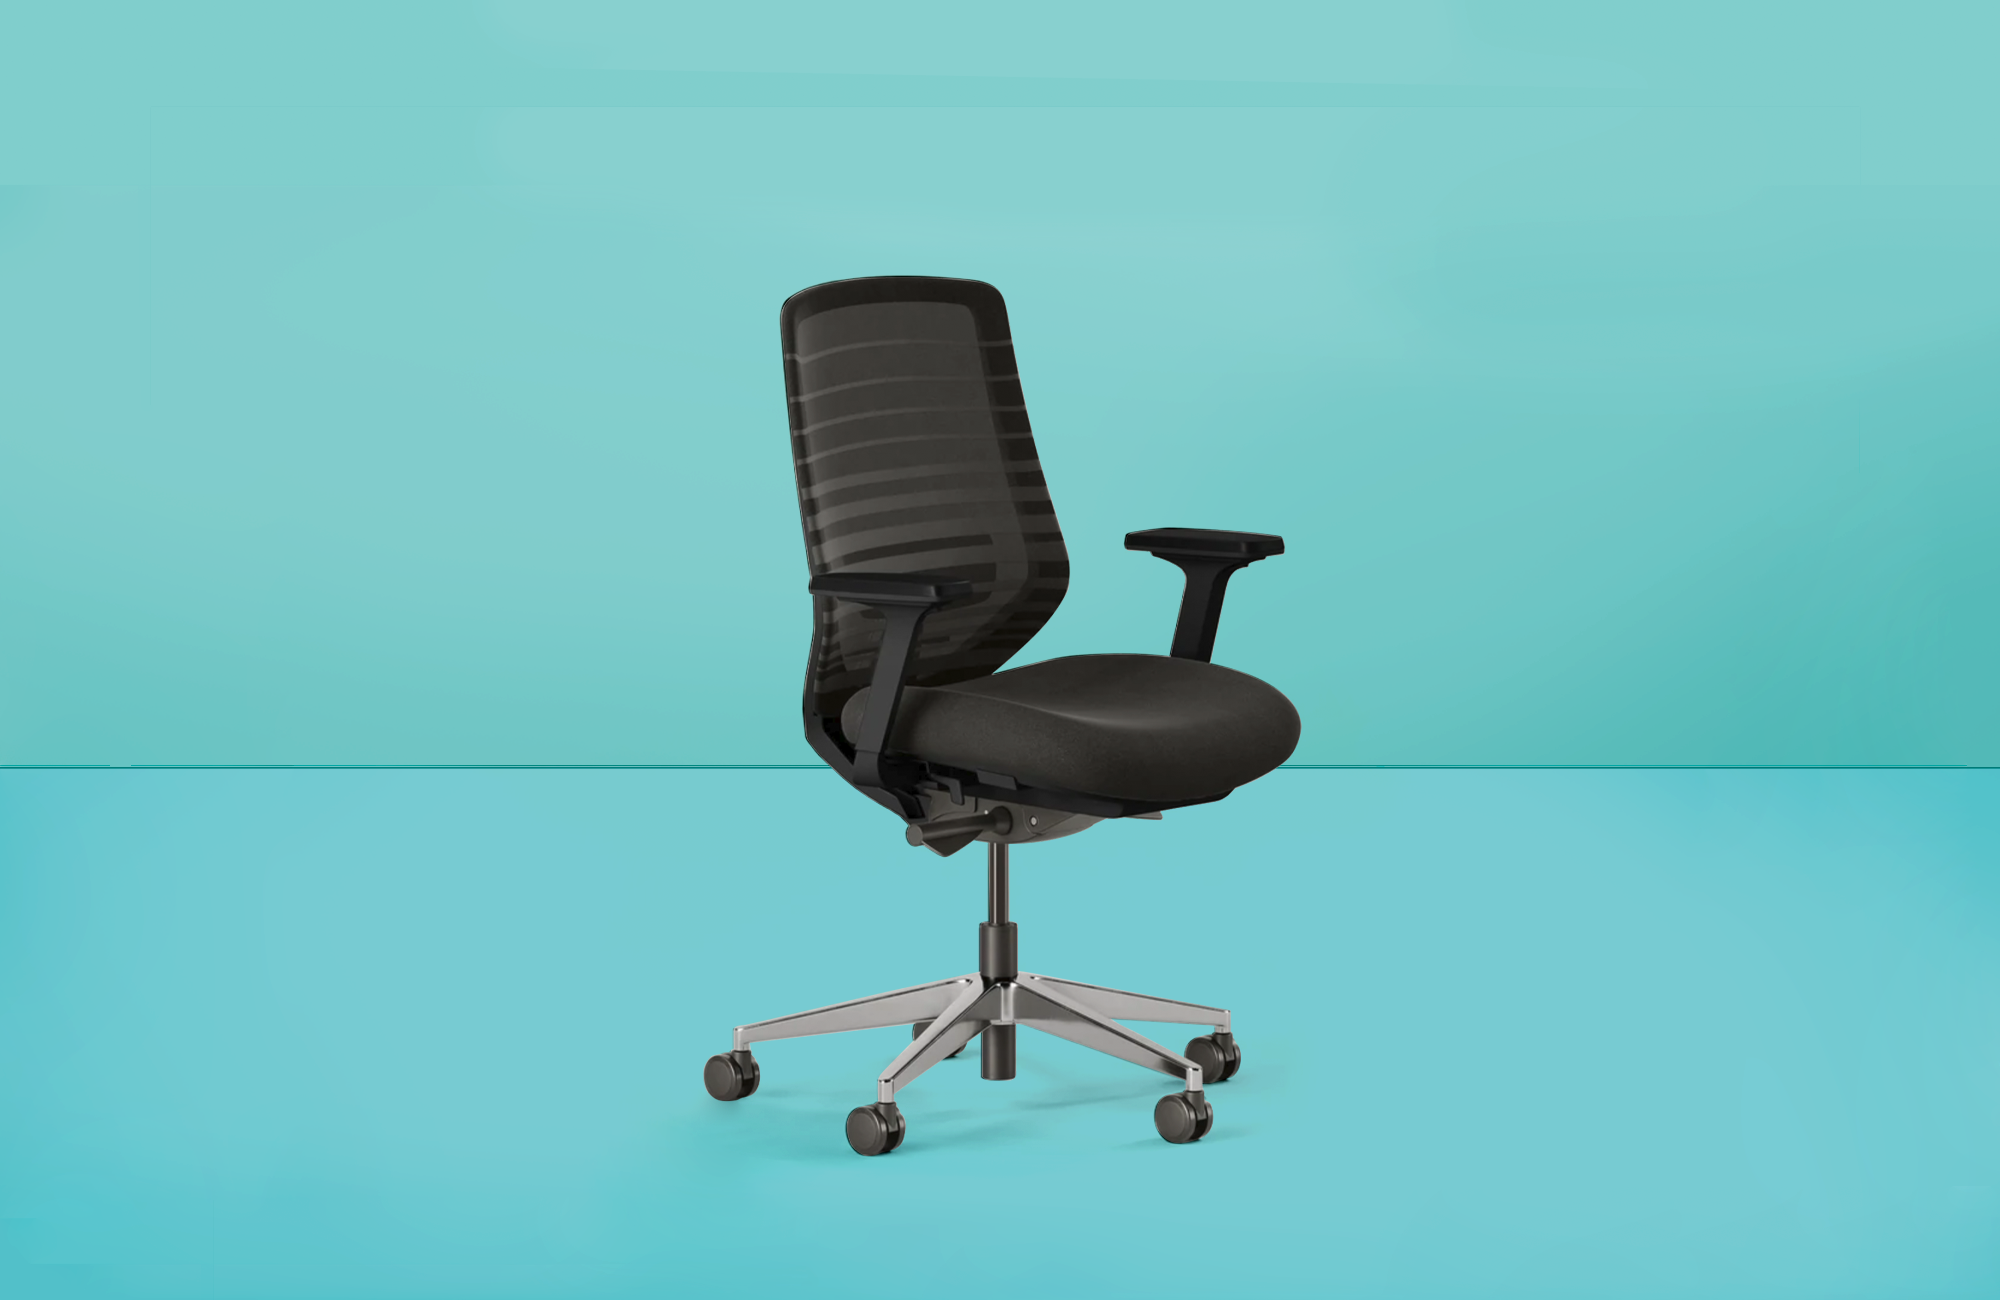 22 Best Office Chairs For Sciatica ideas  best office chair, office chair,  sciatica